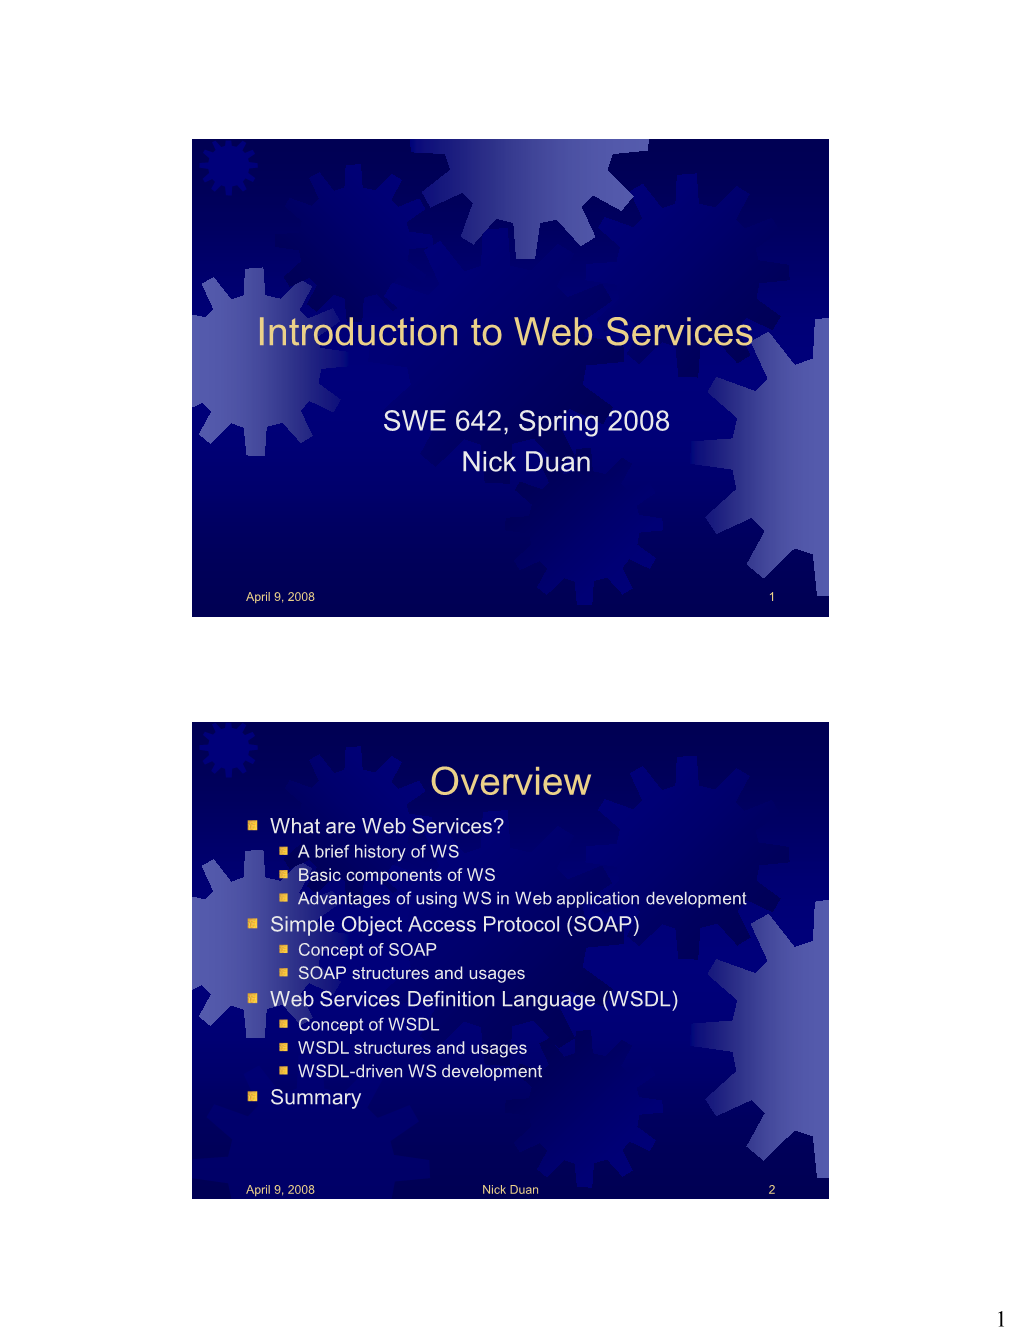 Introduction to Web Services Overview